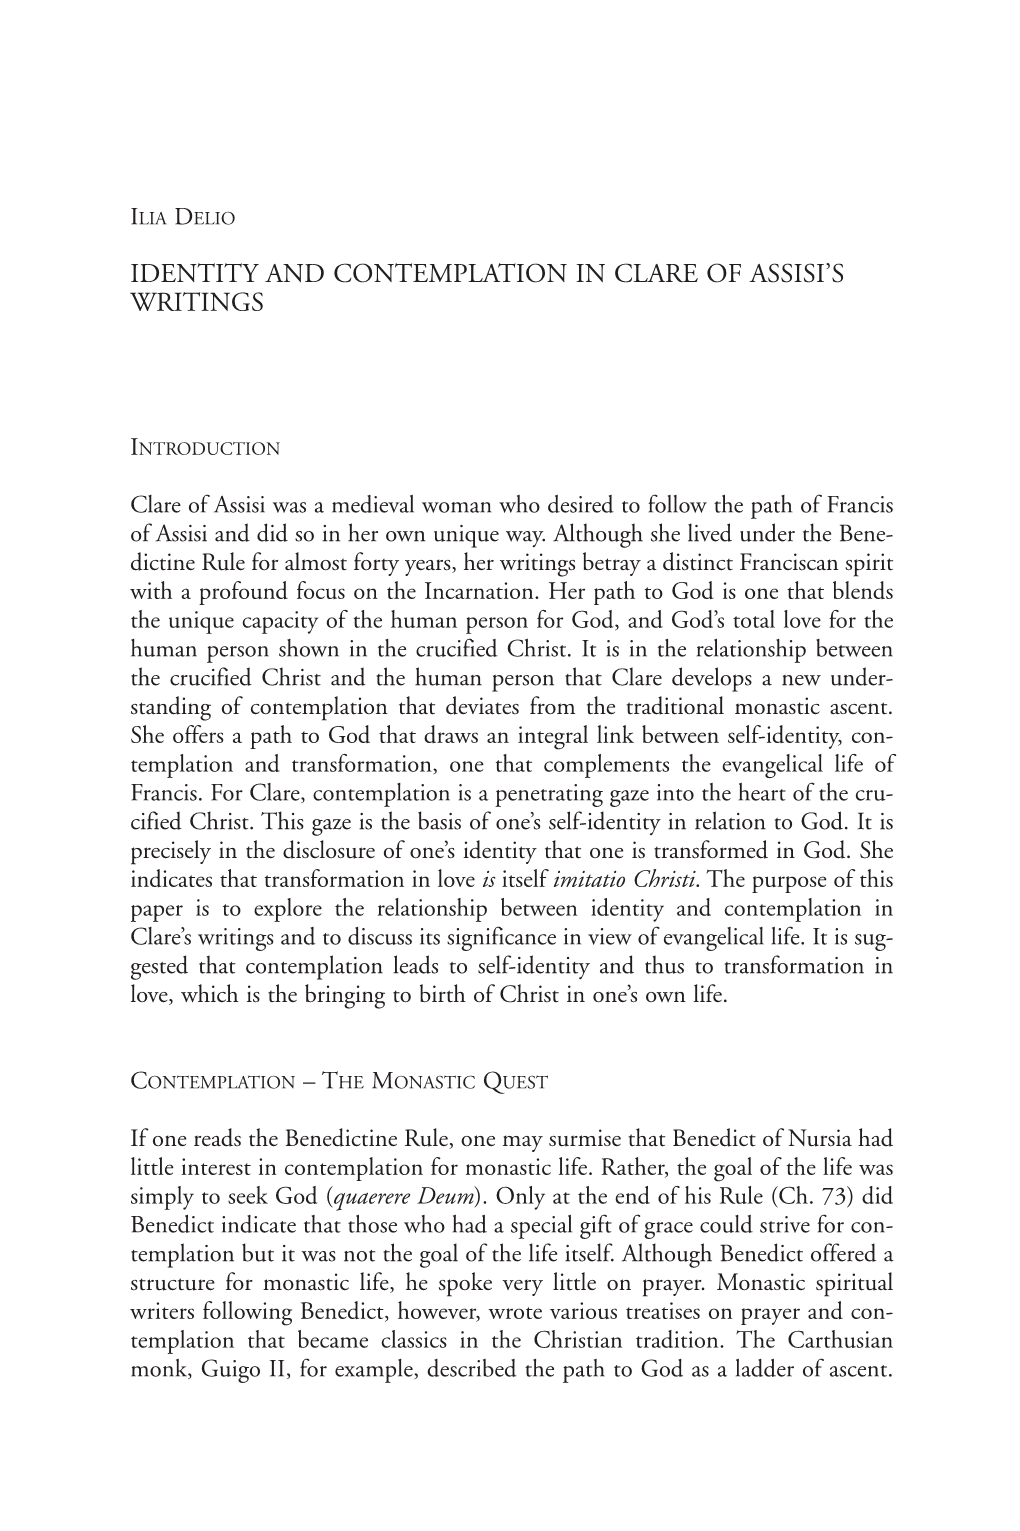 Identity and Contemplation in Clare of Assisi's Writings